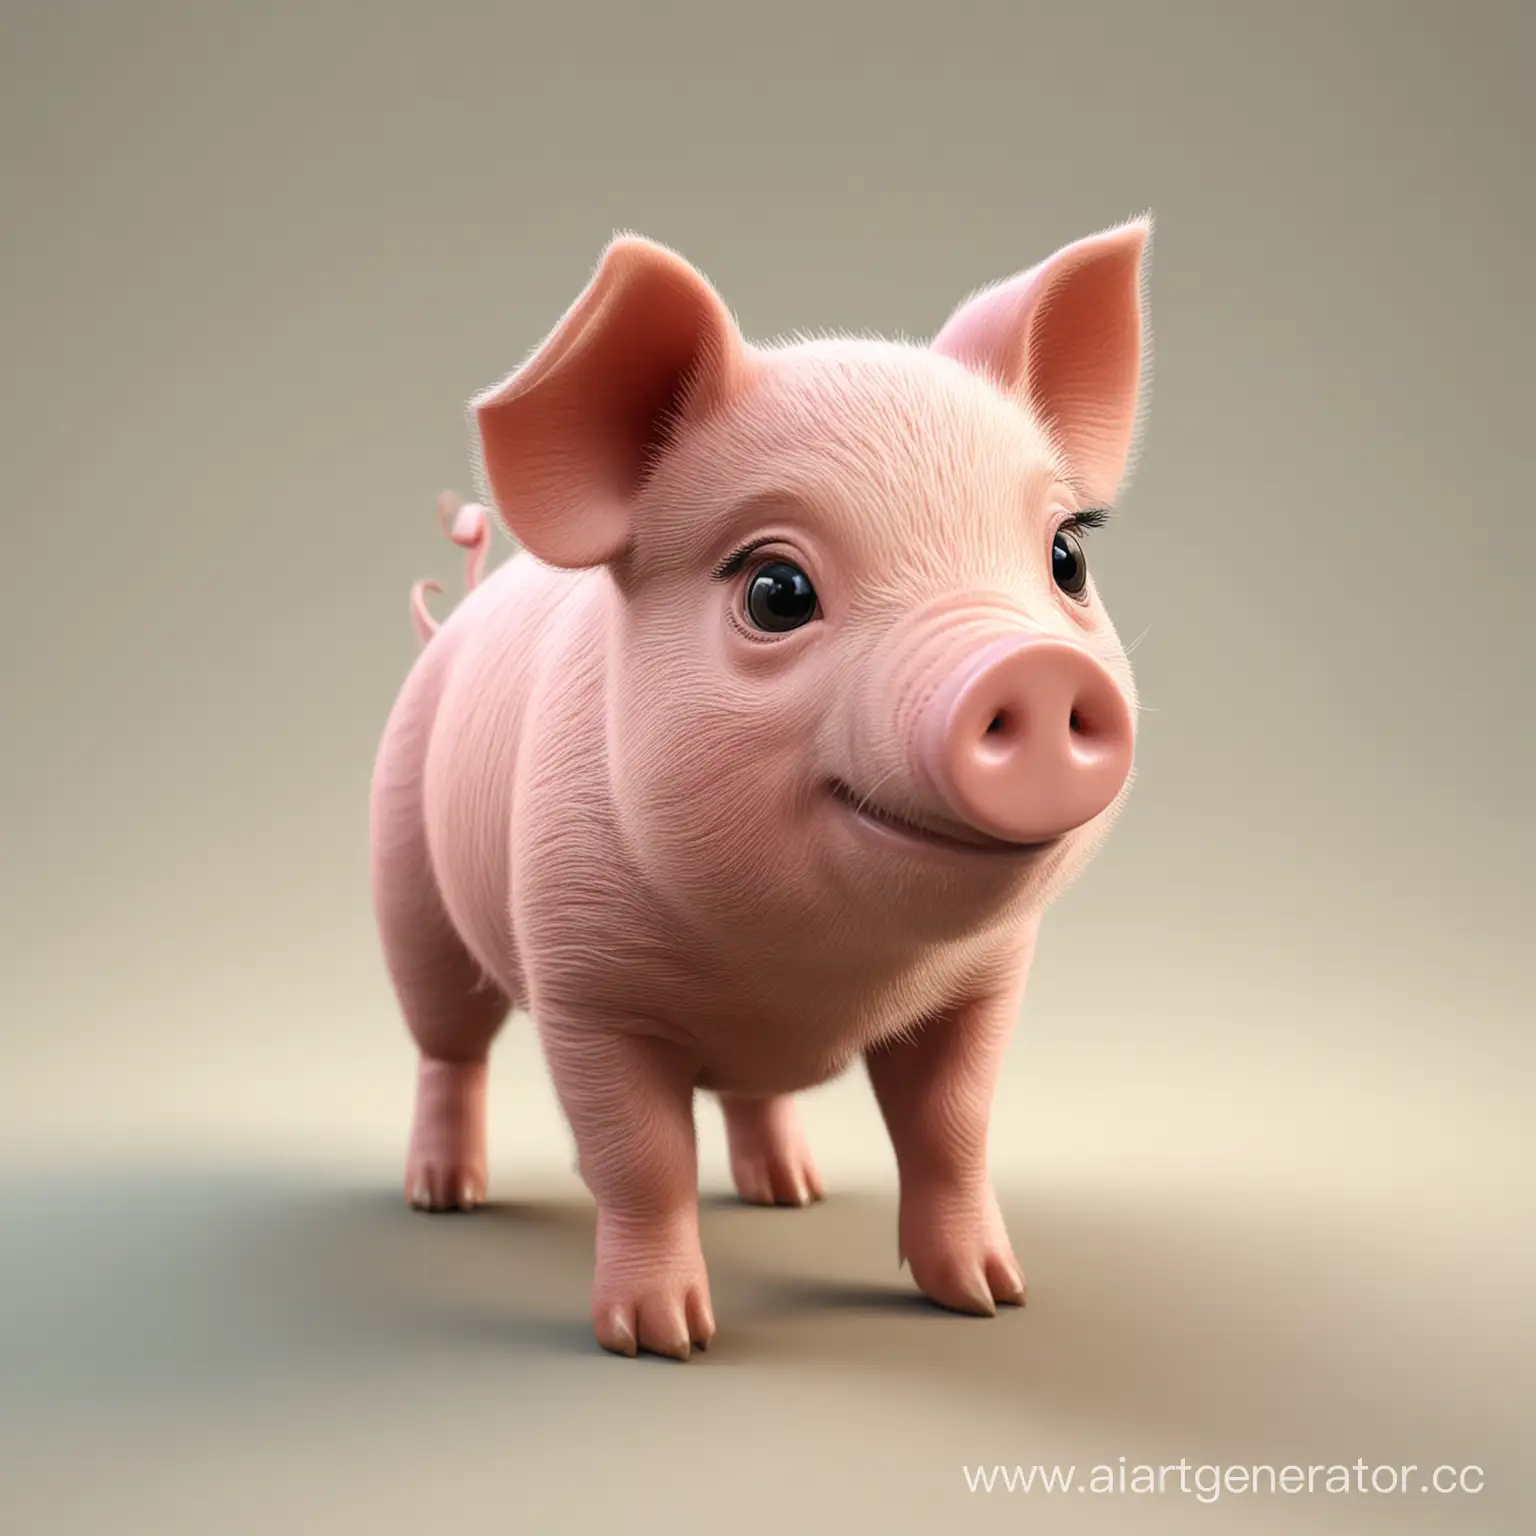 Adorable-Little-Pig-in-Stunning-3D-Effect